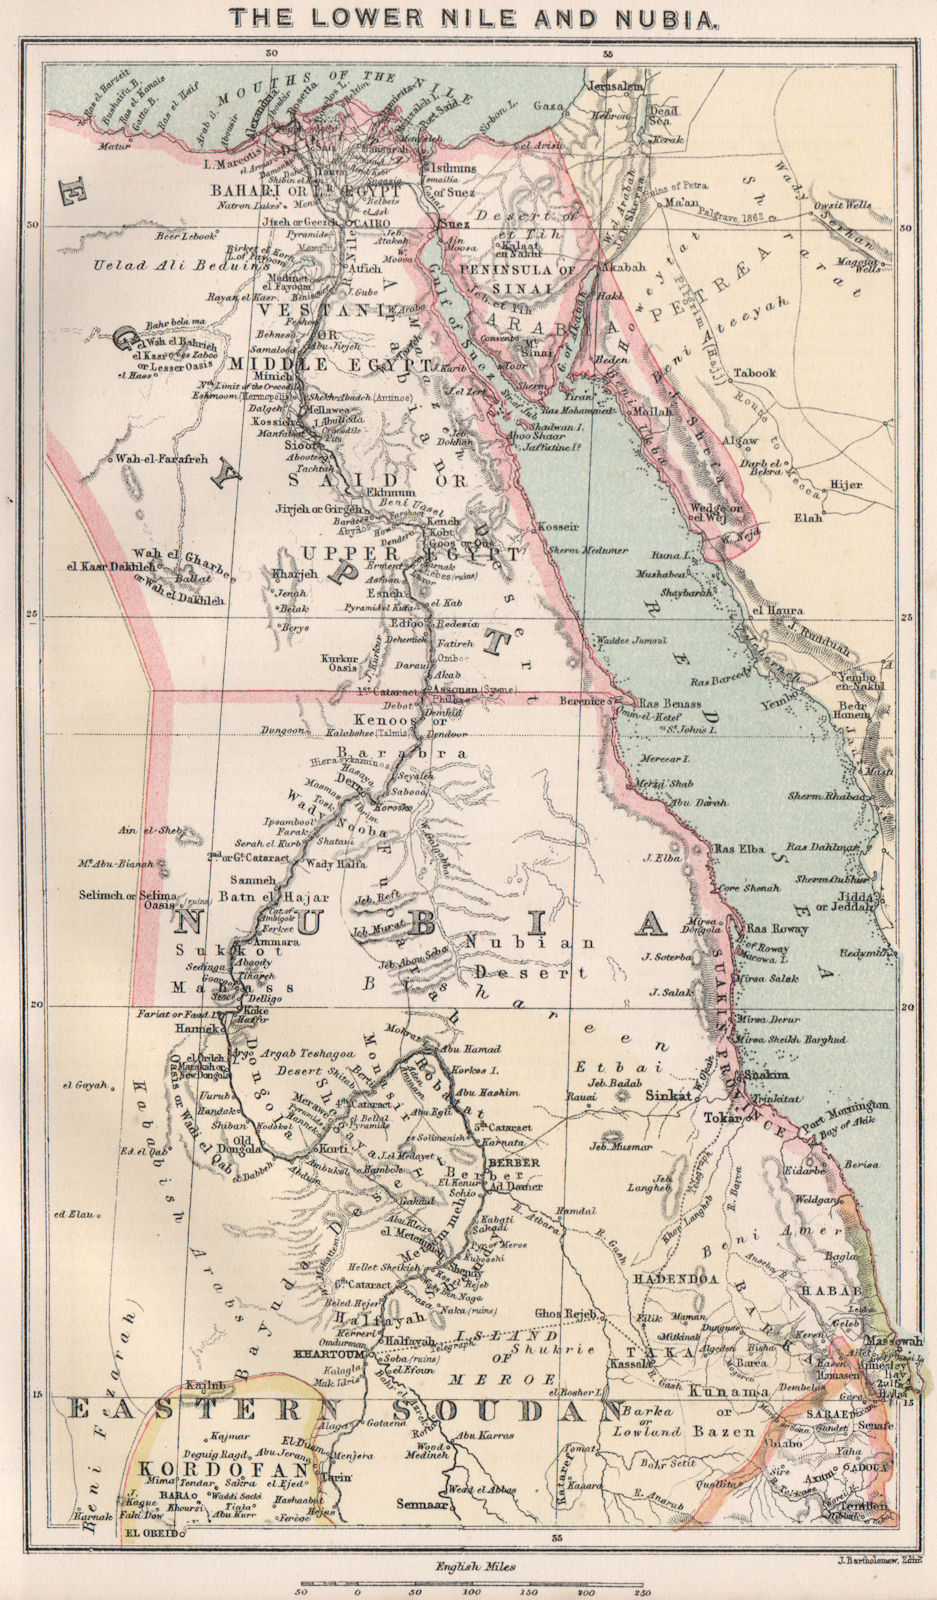 Associate Product The lower Nile and Nubia. Egypt. Red Sea. BARTHOLOMEW 1886 old antique map